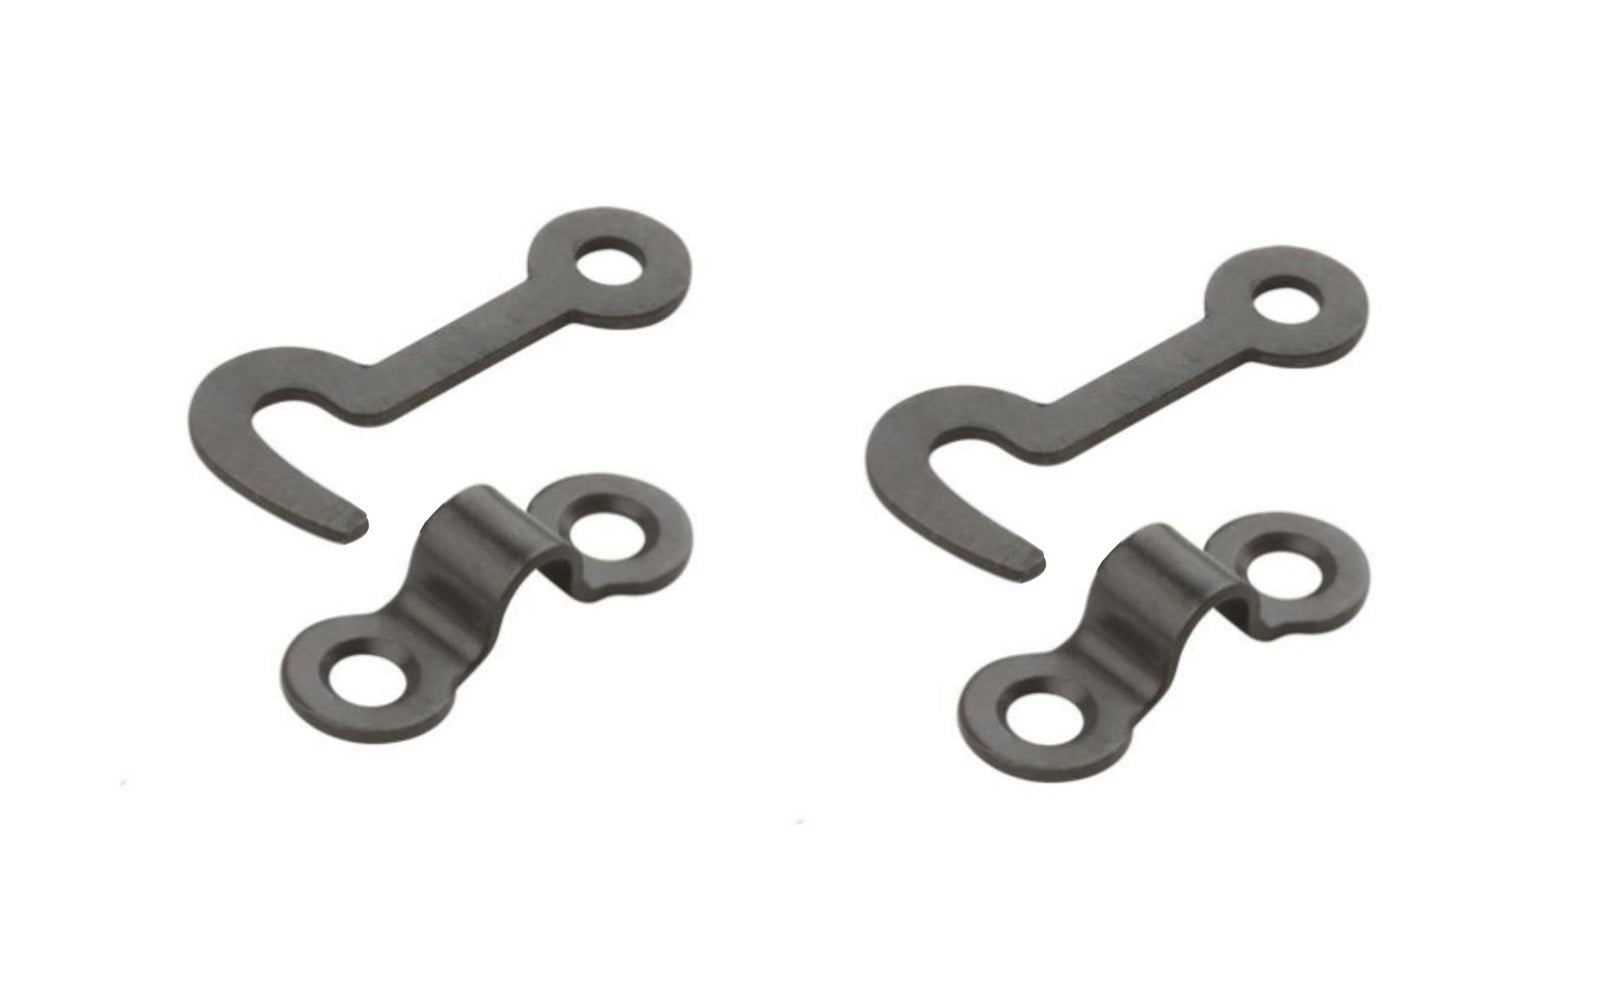 Small Hooks & Staples - 2 Pack. These small small hooks & staples are designed for small chests, jewelry boxes, craft projects, etc. Hook & loop design can be used for left or right hand applications. Sold as two hooks & staples in pack. Oil rubbed bronze